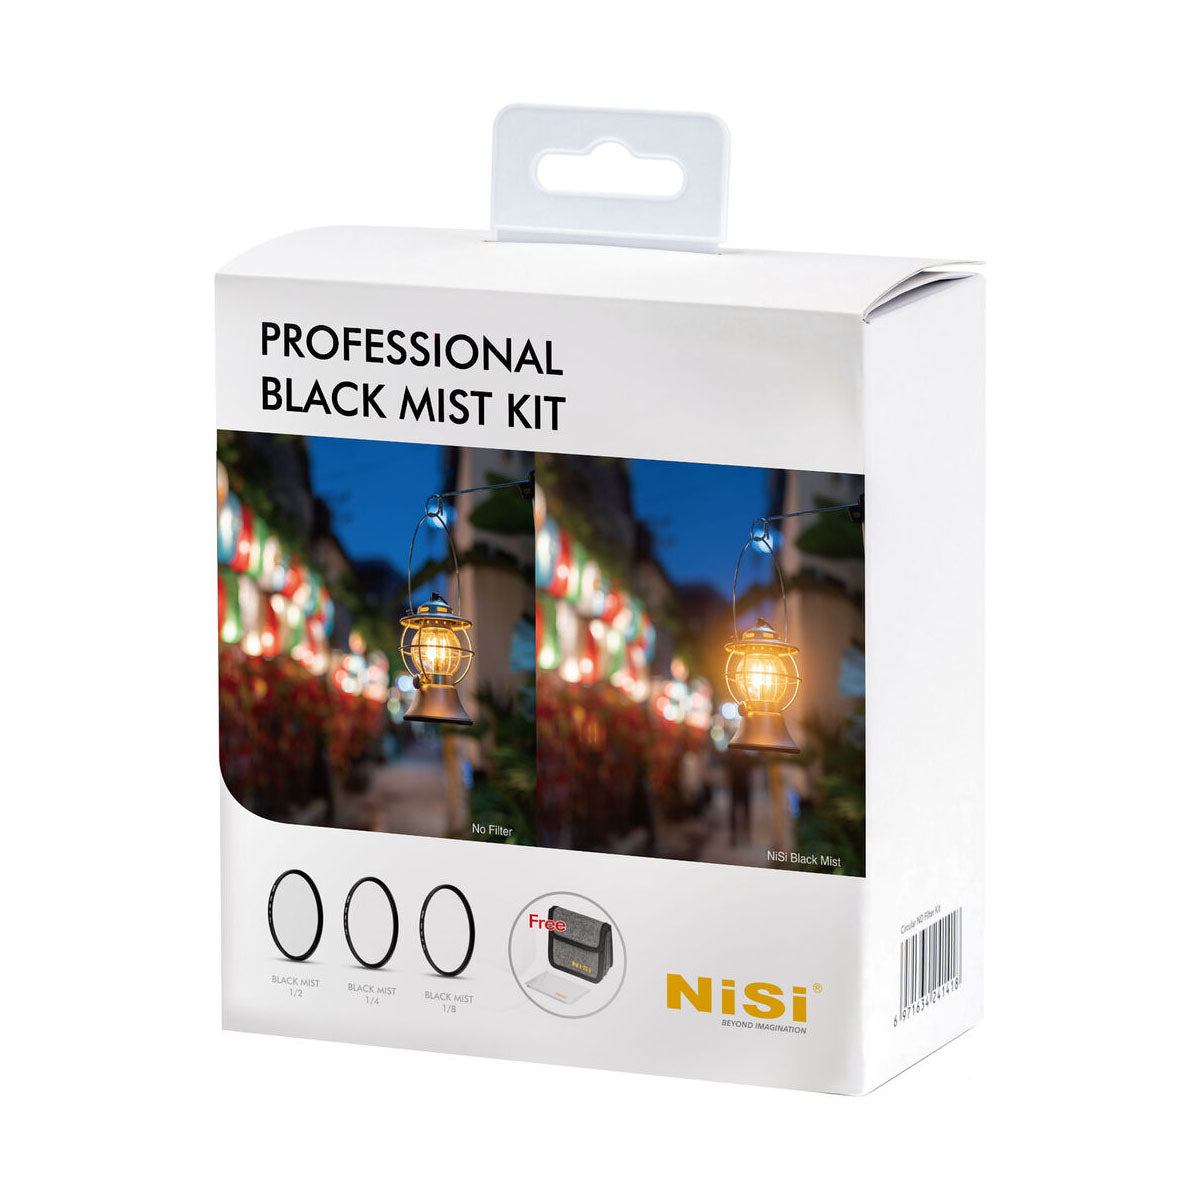 NiSi 82mm Professional Black Mist Kit with 1/2, 1/4, 1/8 and Case